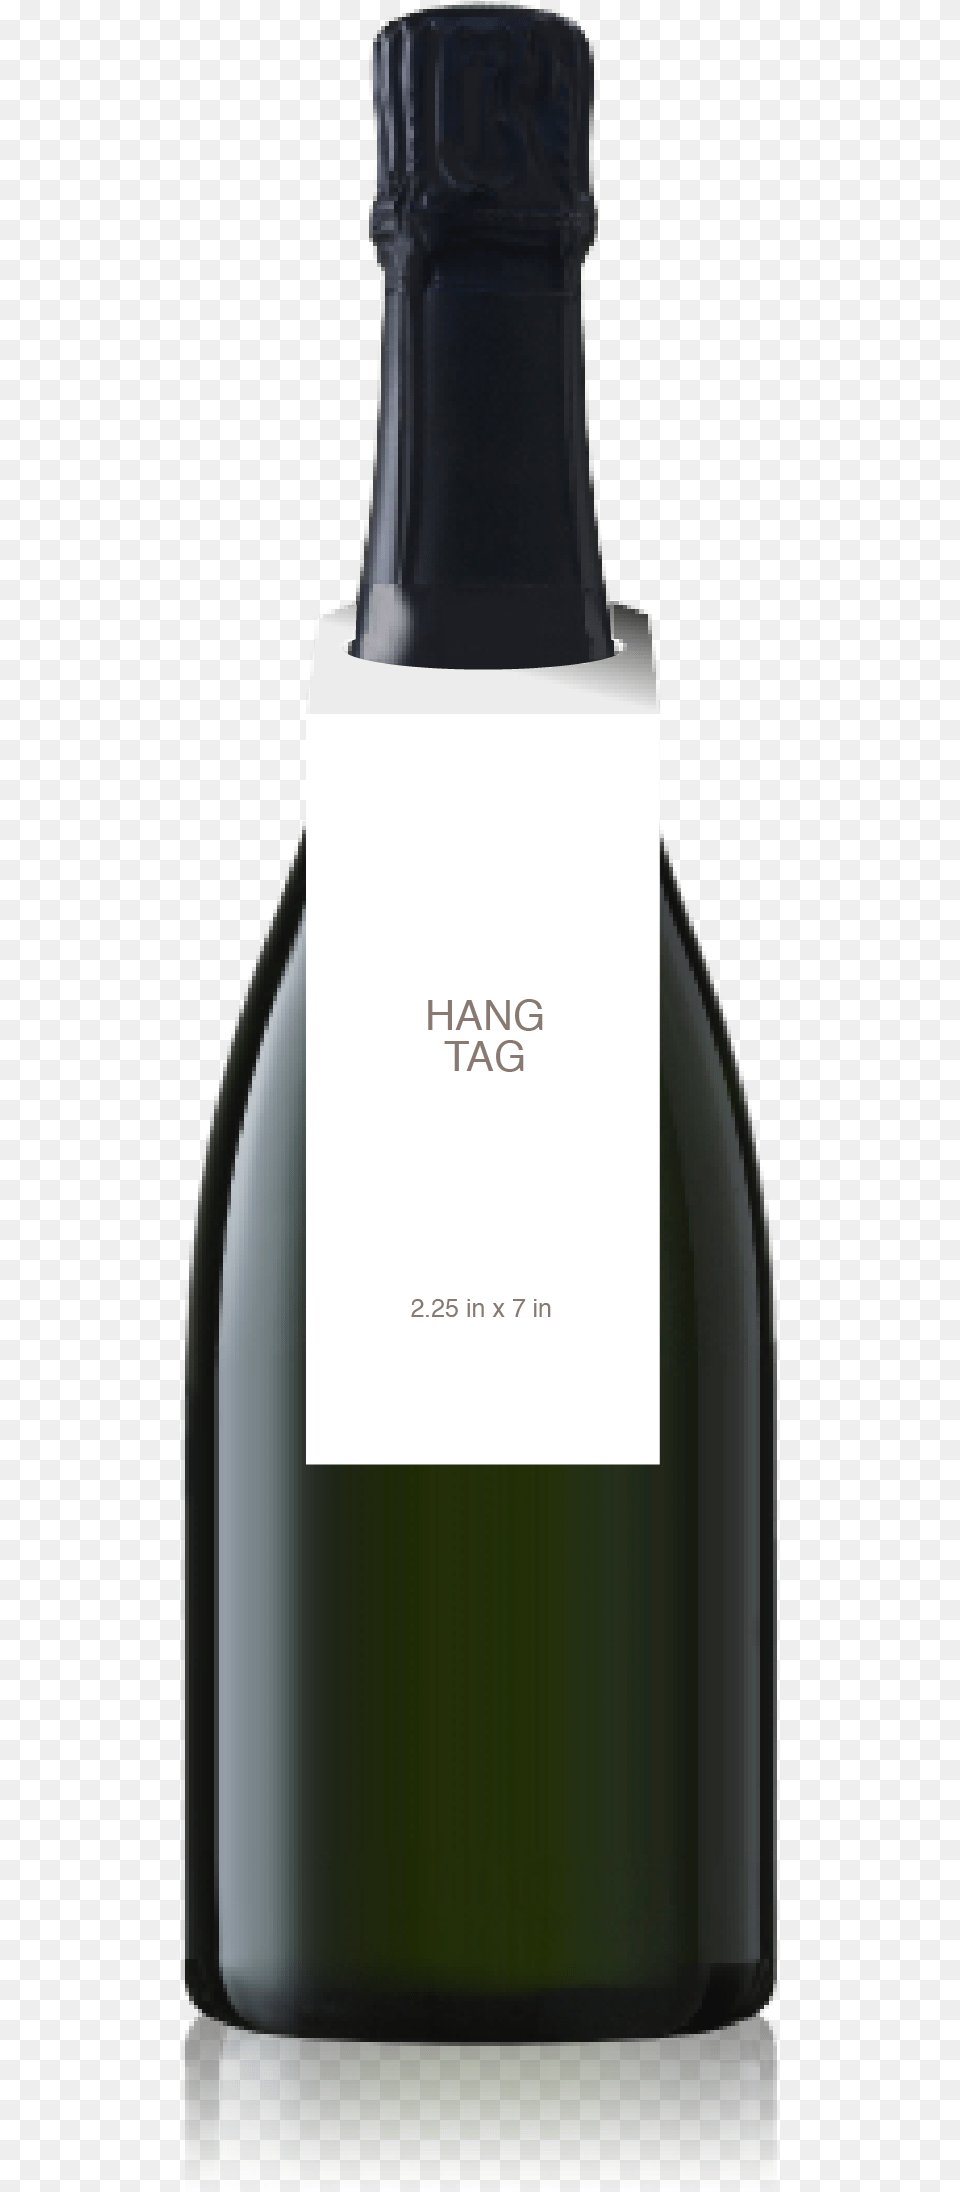 Champagne Bottle With A Blank Hangtag From Crushtag Champagne Bottle Neck Tags, Alcohol, Beverage, Liquor, Wine Png